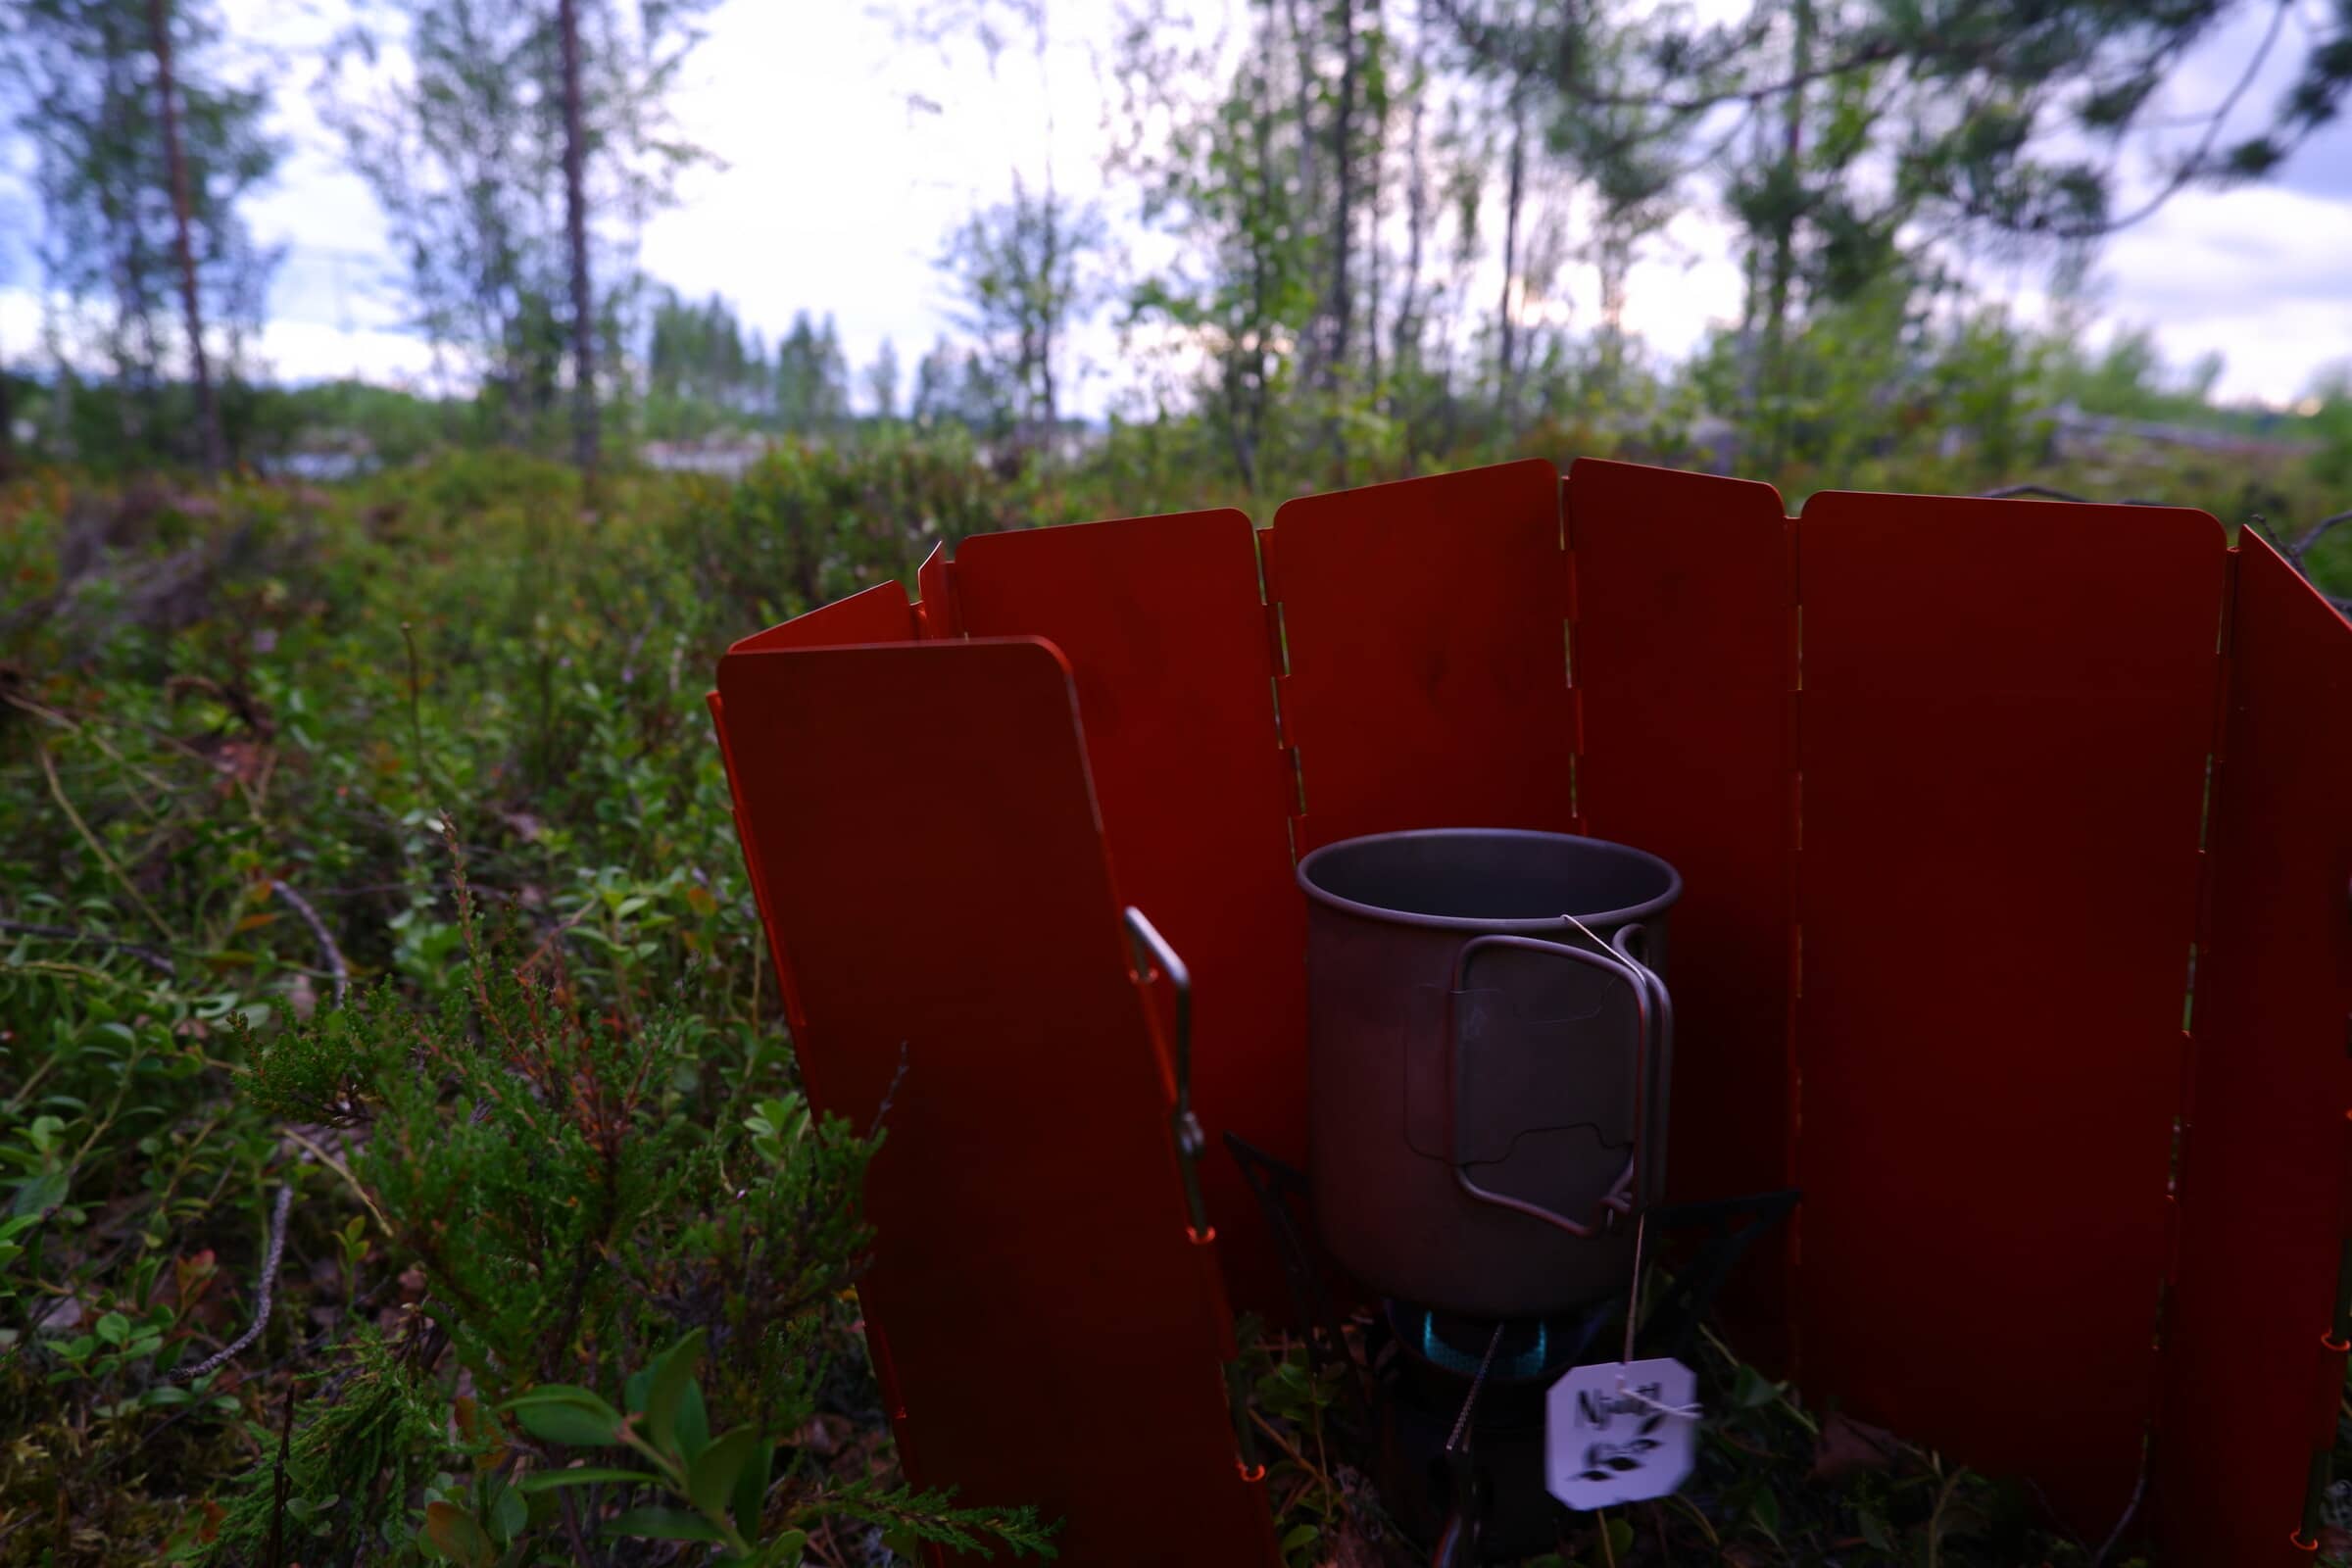 A camping mug on a multifuel burner with a teabag in it. There's a bit of steam rising as its coming up to a boil.